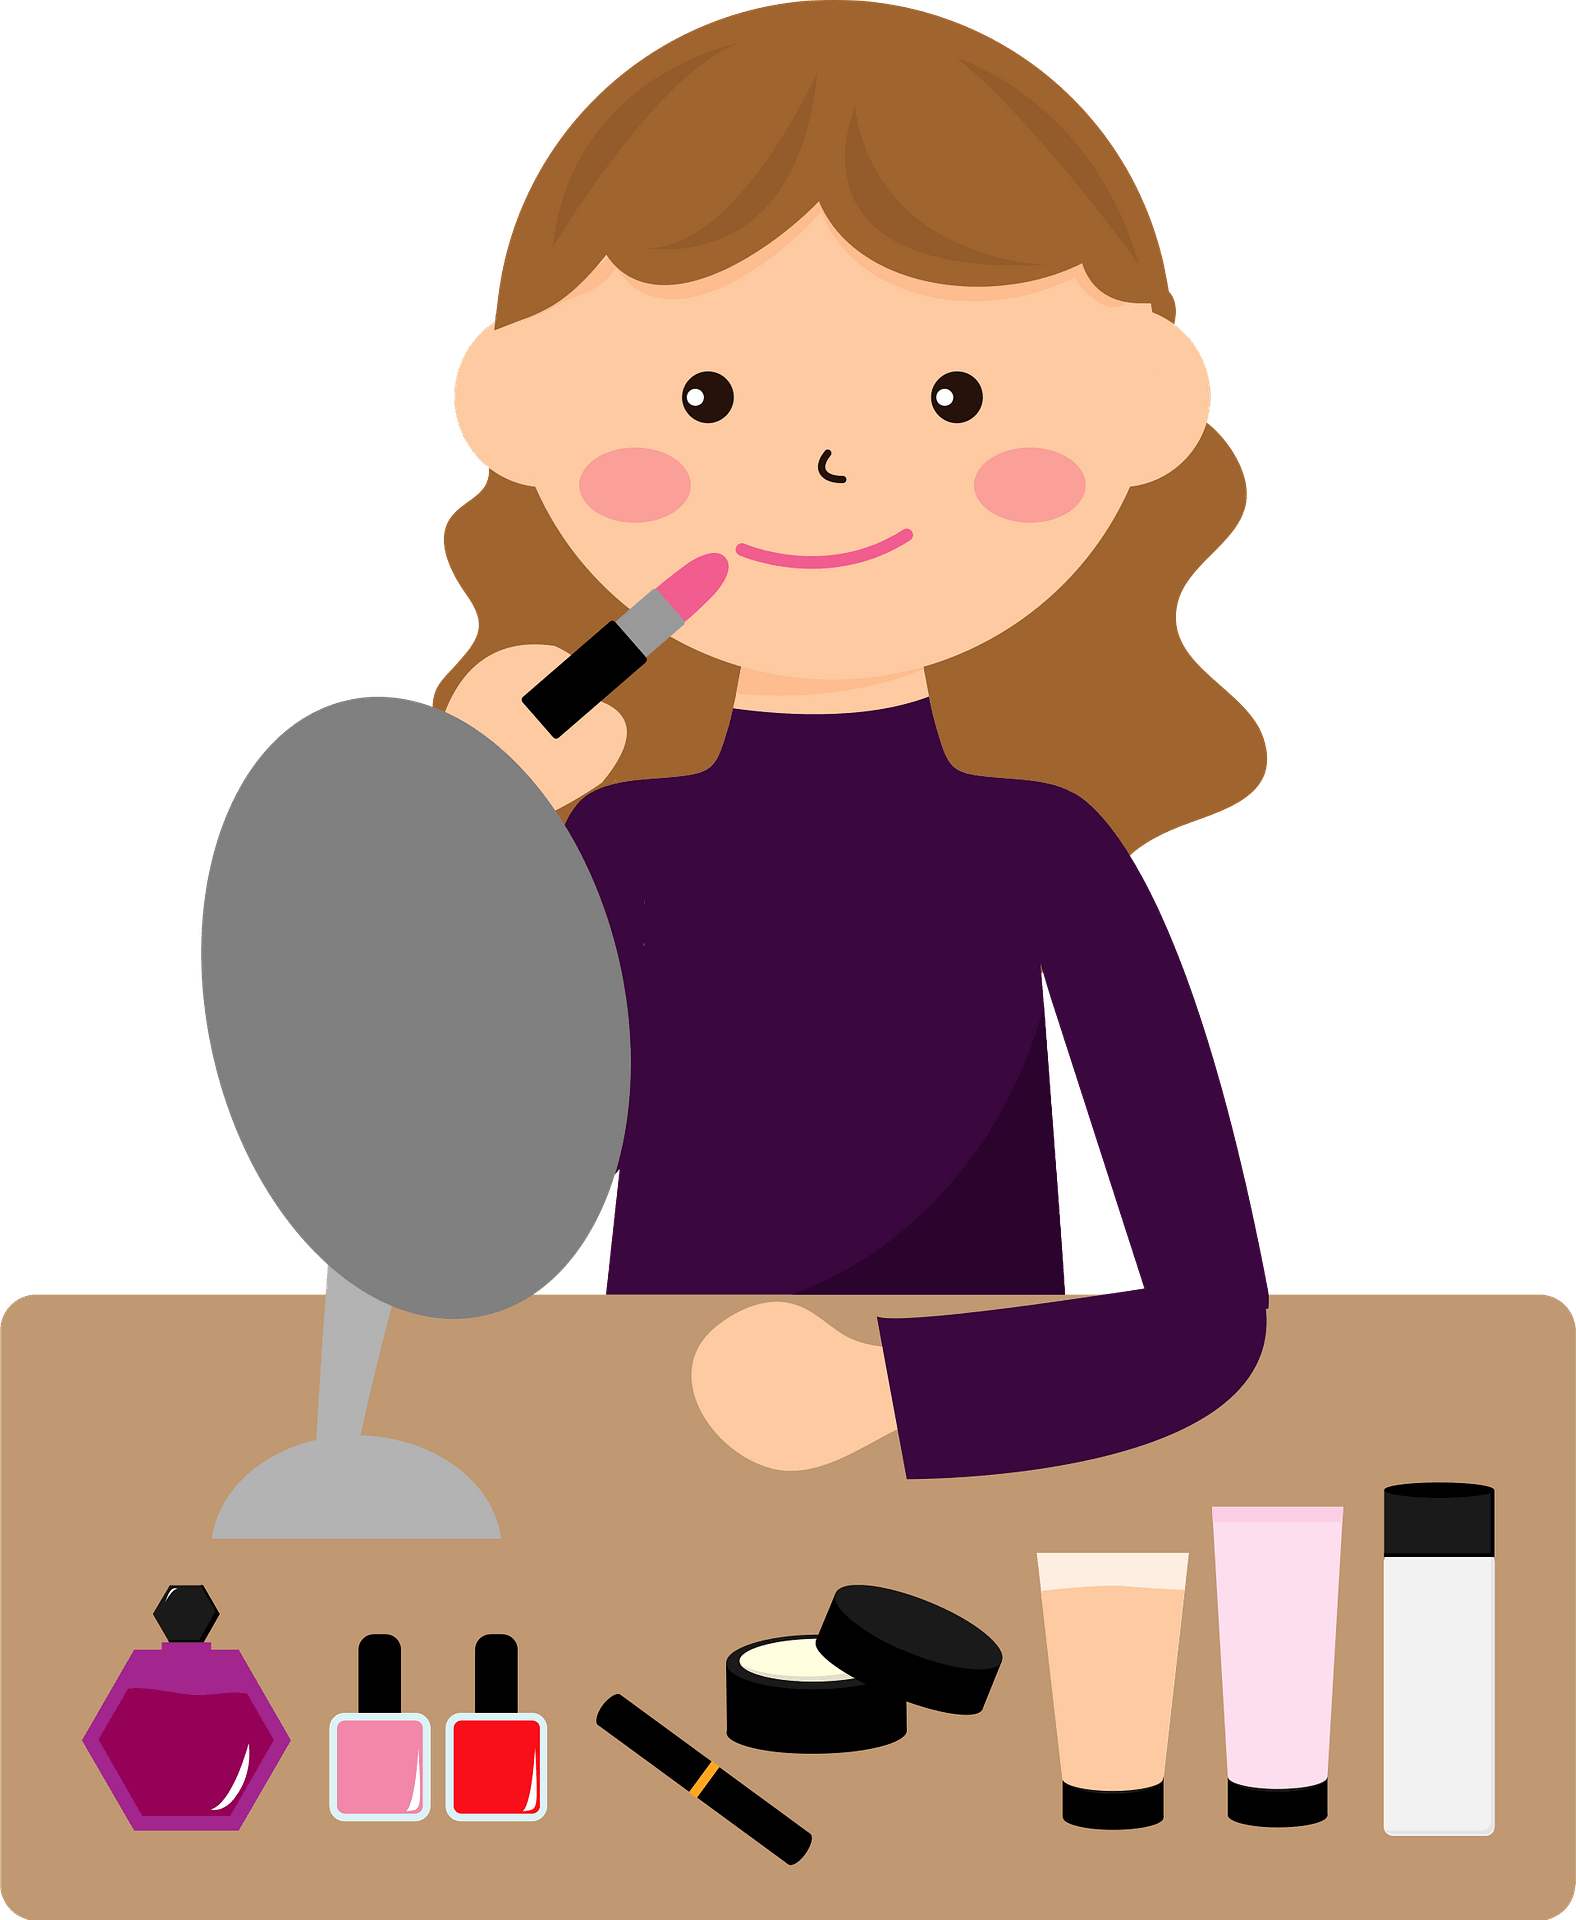 Beauty Cosmetics Clipart - girl-with-putting-on-makeup-clipart - Clip ...